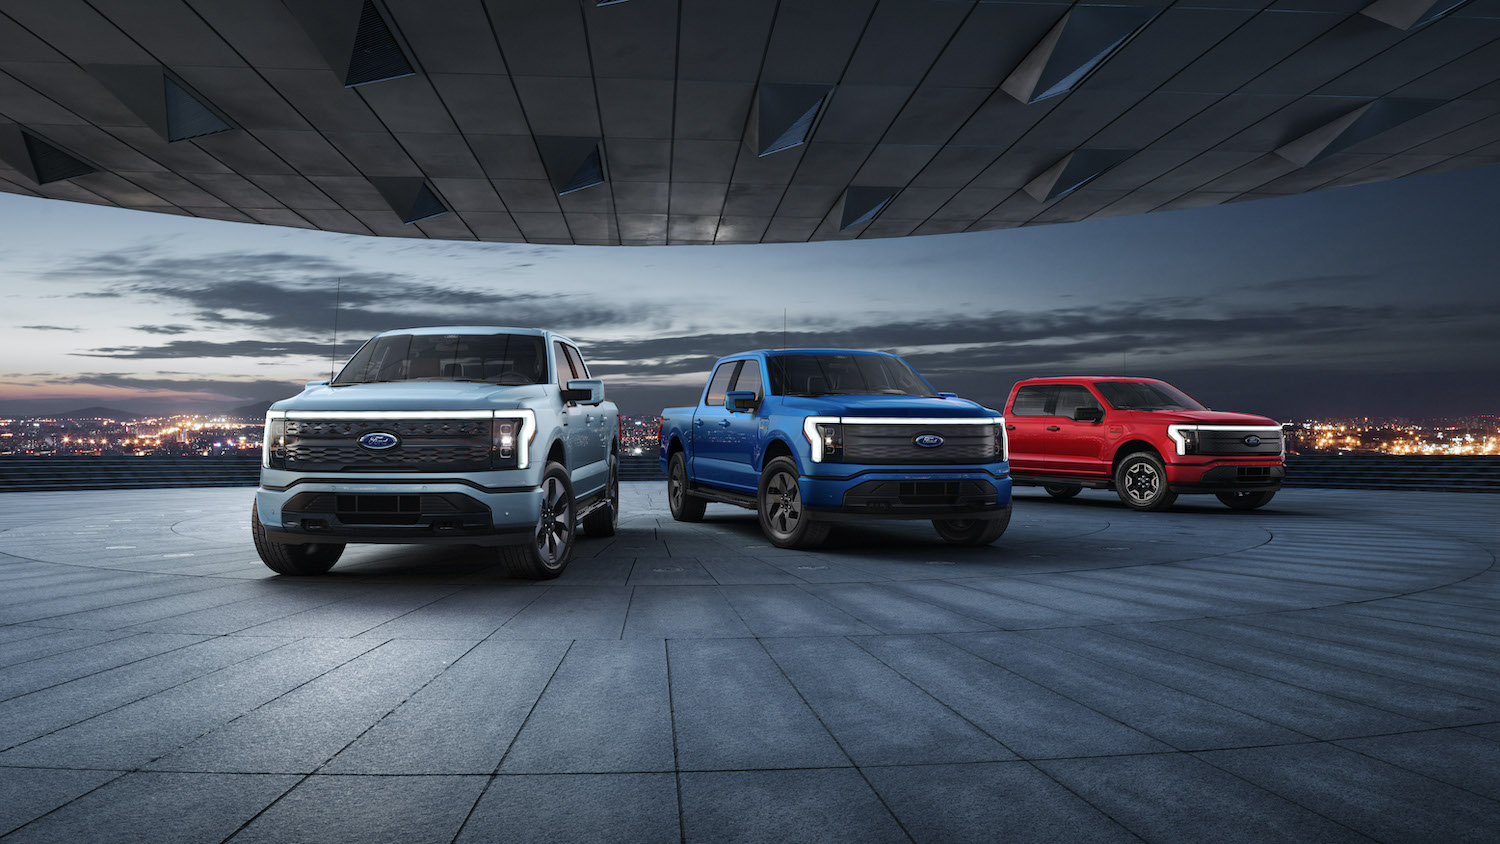 These are the F-150 Lightning electric truck prototypes. See how they stack up to the Tesla Cybertruck and the GMC Hummer EV